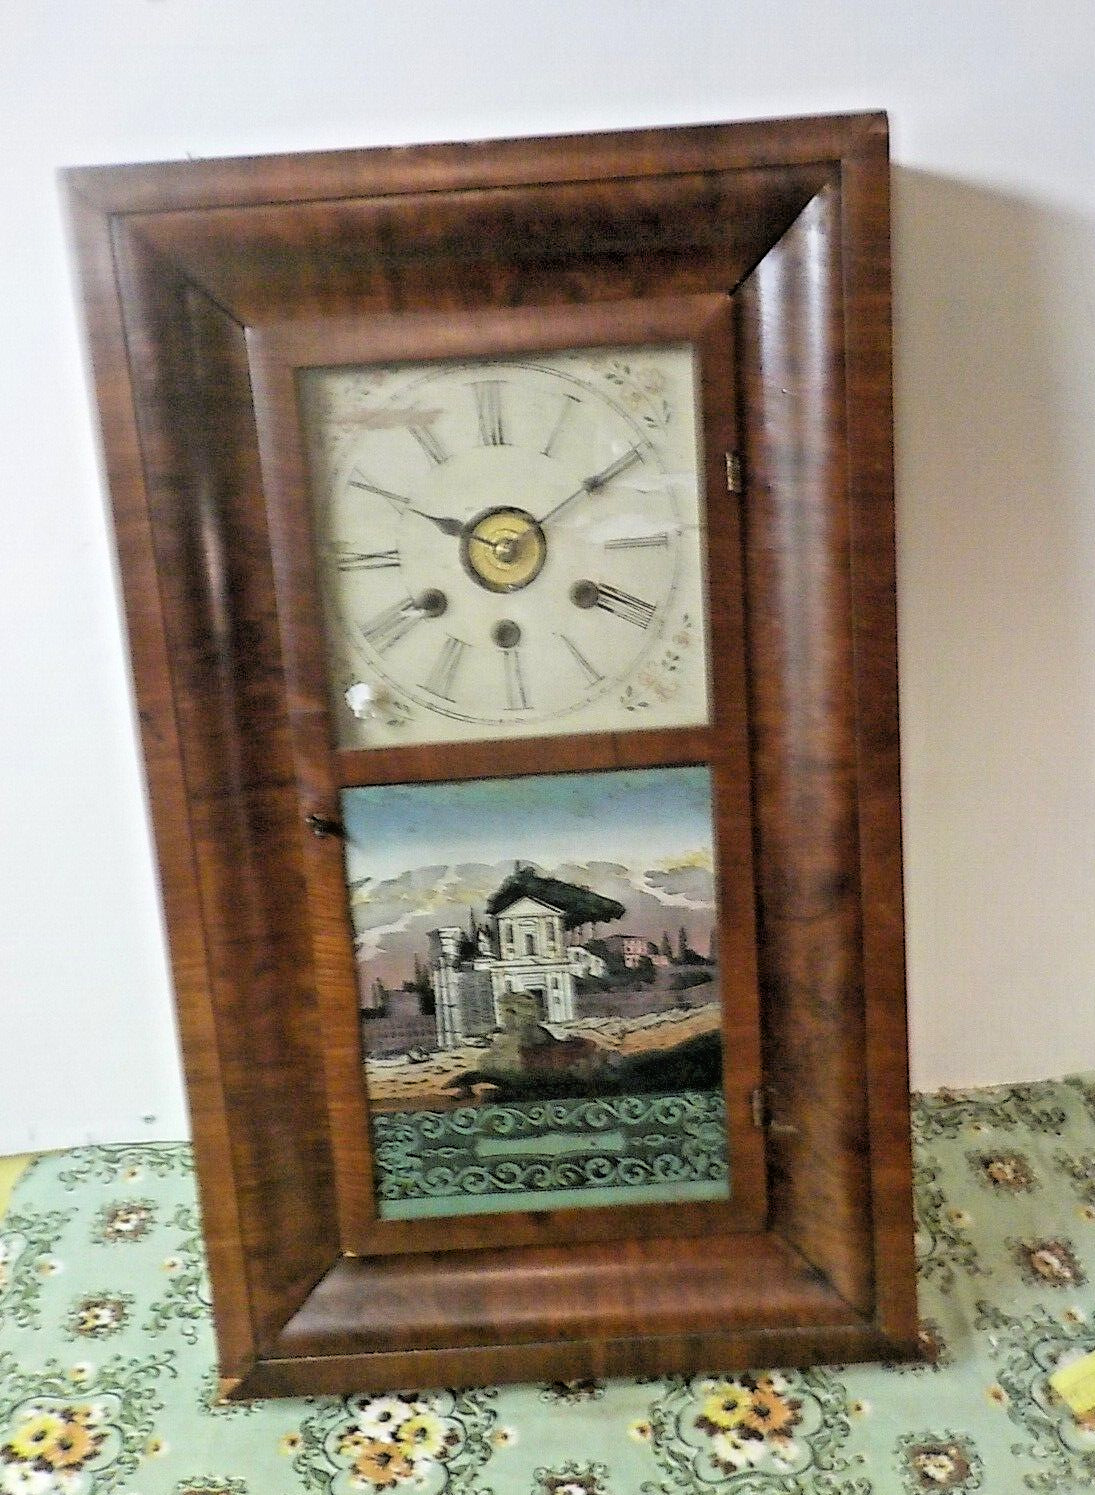 NEW HAVEN WEIGHT CLOCK SOLD FOR PARTS / REPAIR